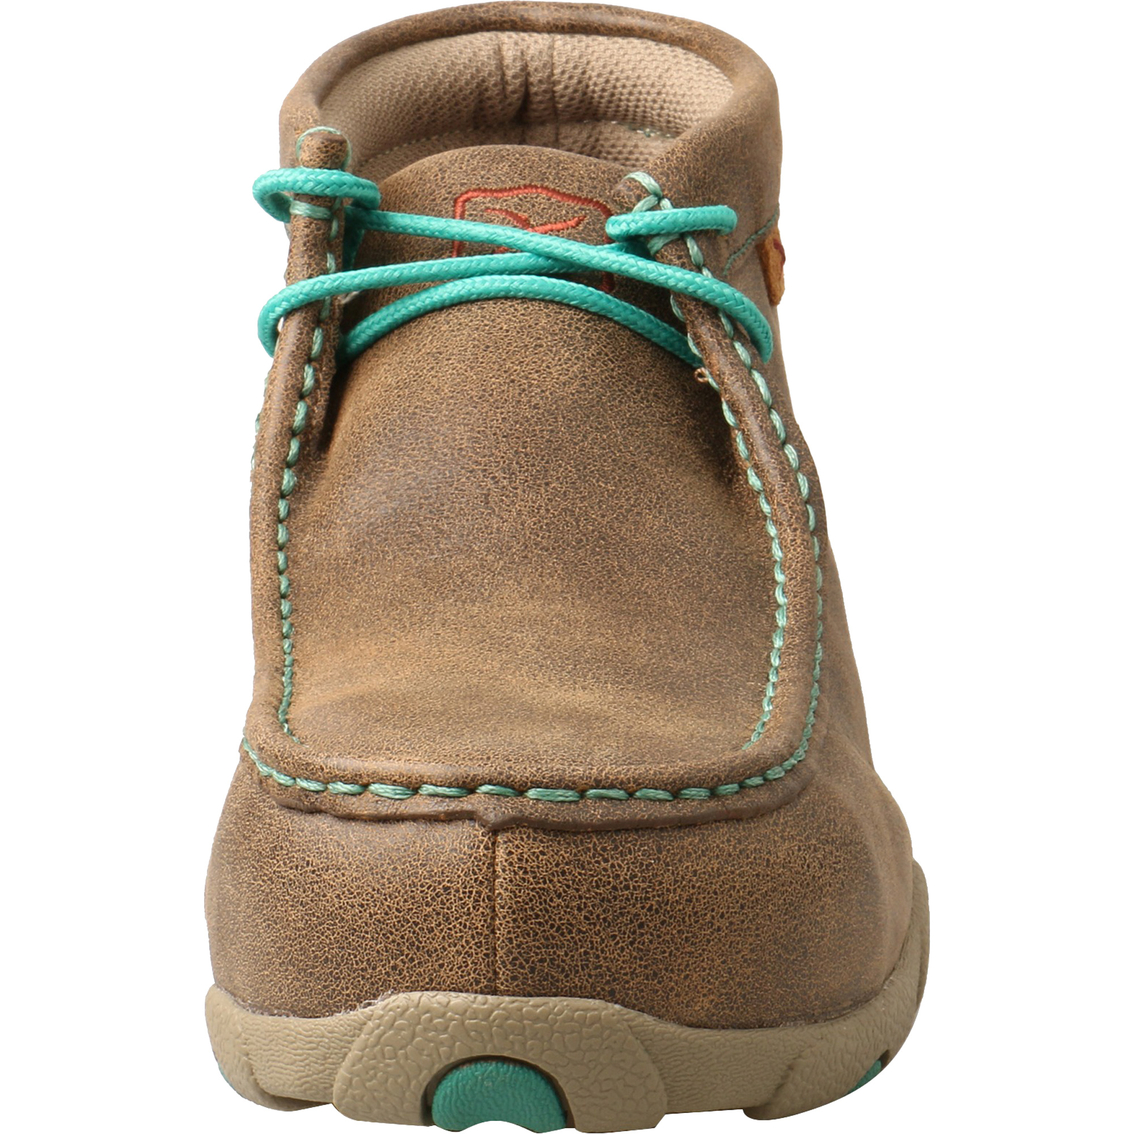 Twisted X Women's Work Alloy Toe Chukka Driving Moc Shoes - Image 4 of 6